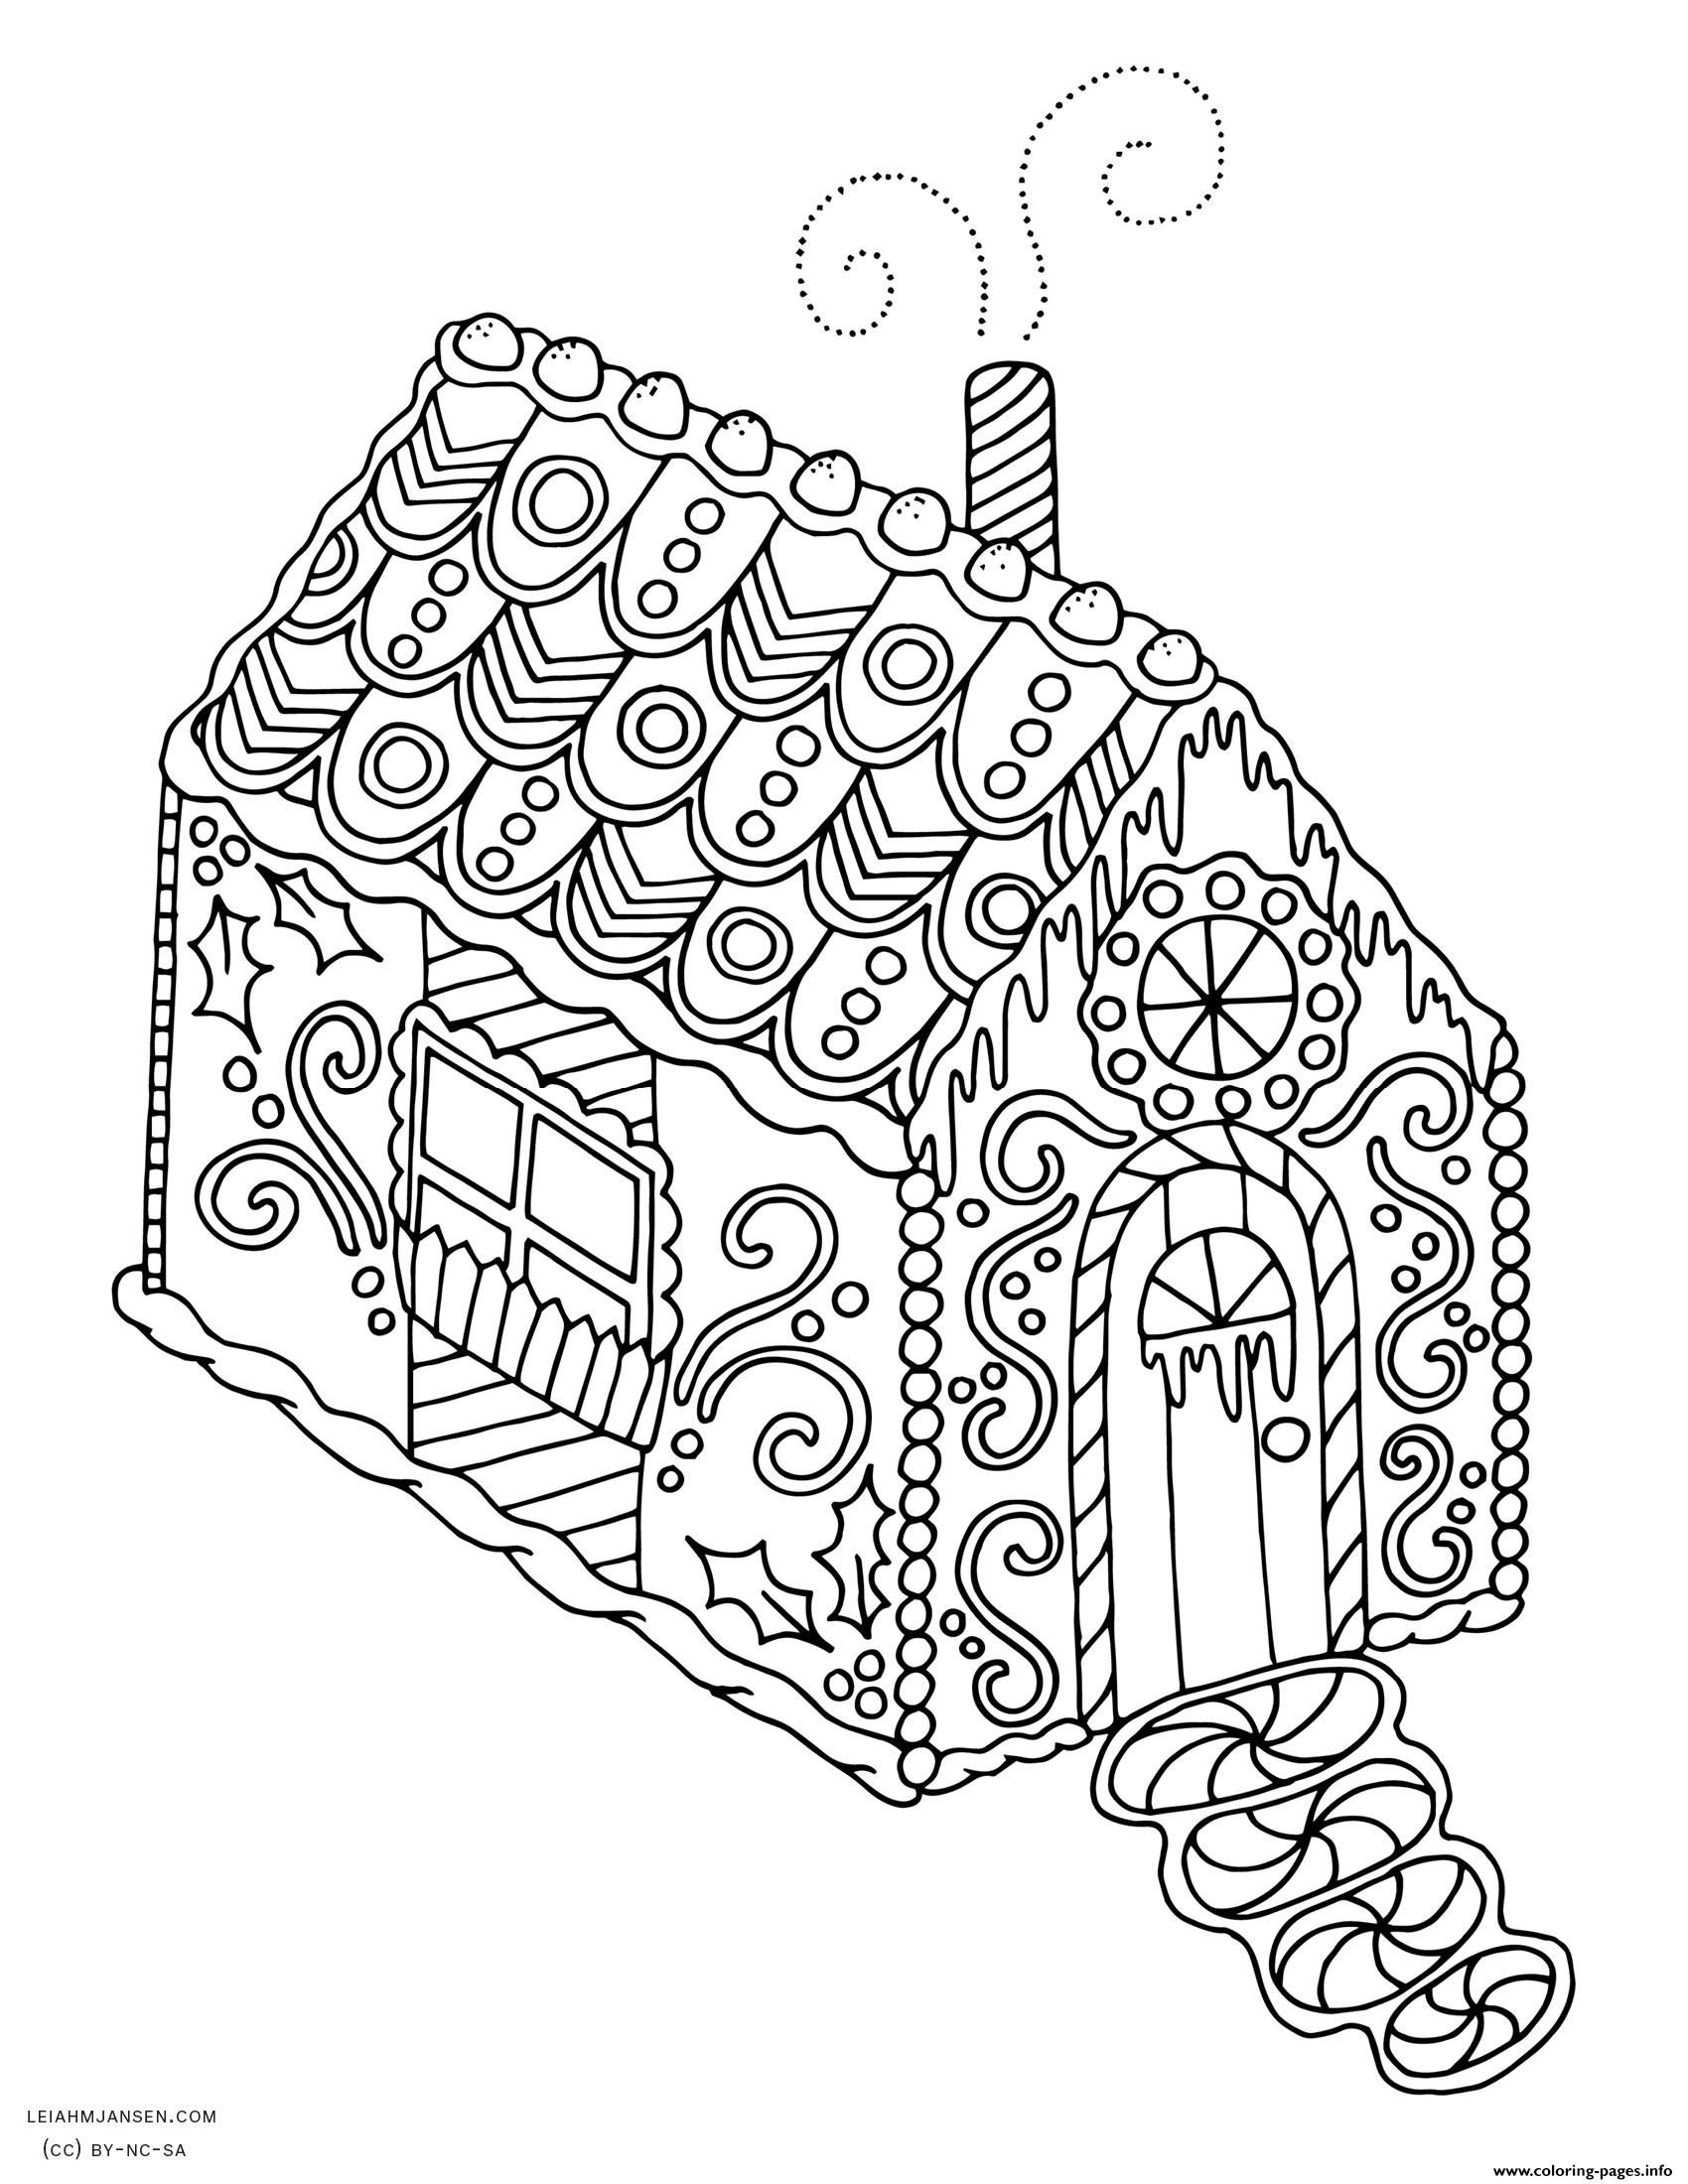 Coloring Pages Holiday Coloring Pages Gingerbread House Coloring Pages Holiday Amazing